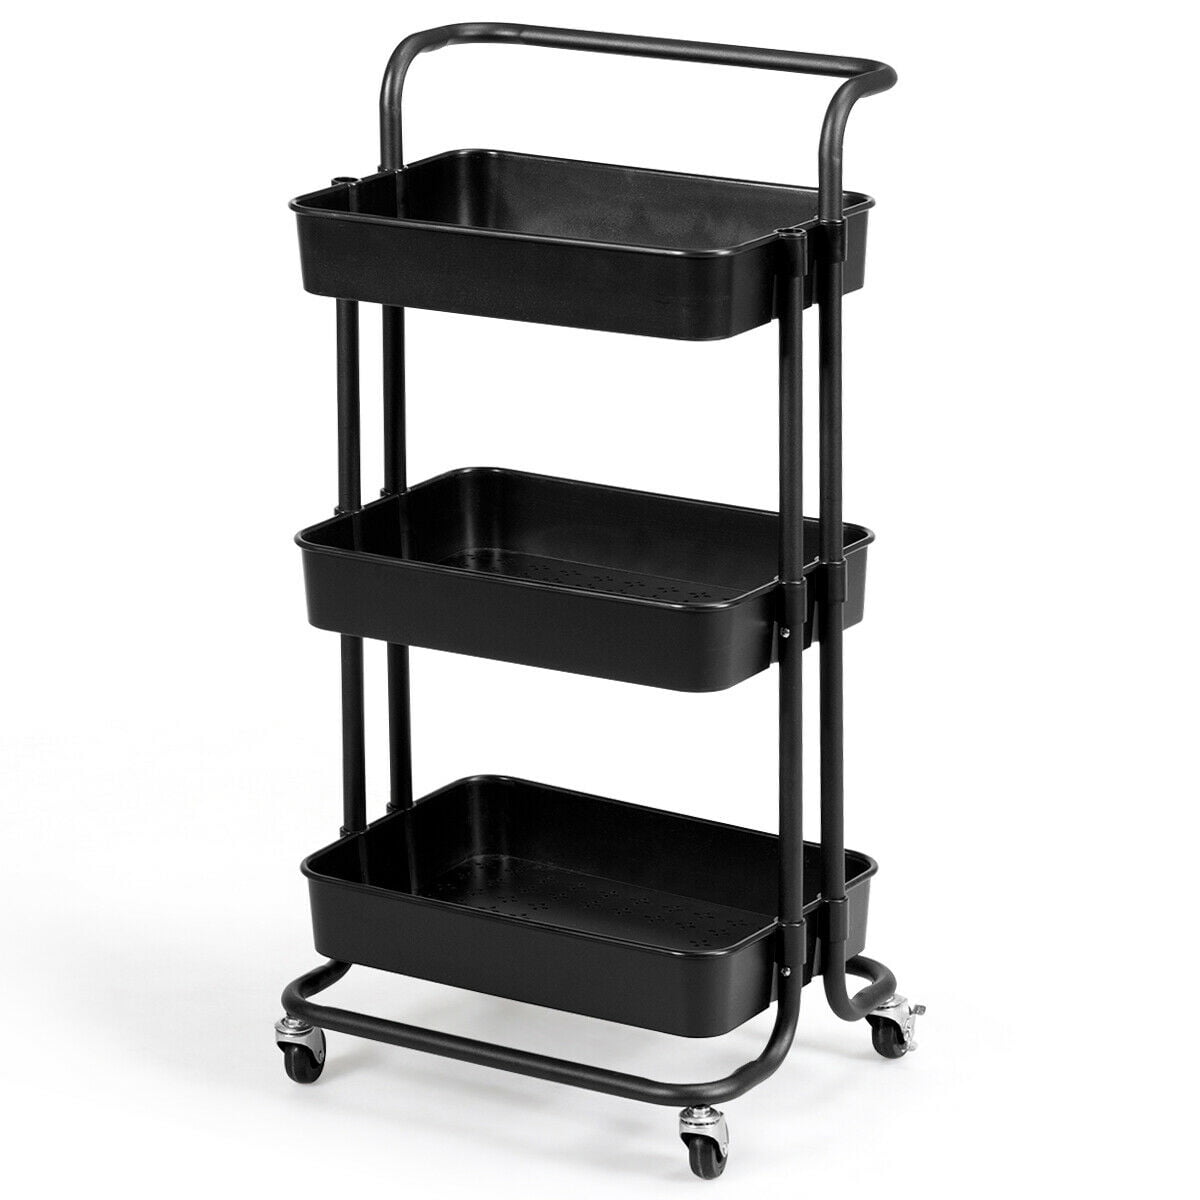 Storage Service Cart with Drawer Storage Trolley for Home Workshop Garage Load Capacity 150KG GYMAX 3 Tier Tool Storage Cart Lockable Wheels Ergonomic Handle and Nonslip Cushion